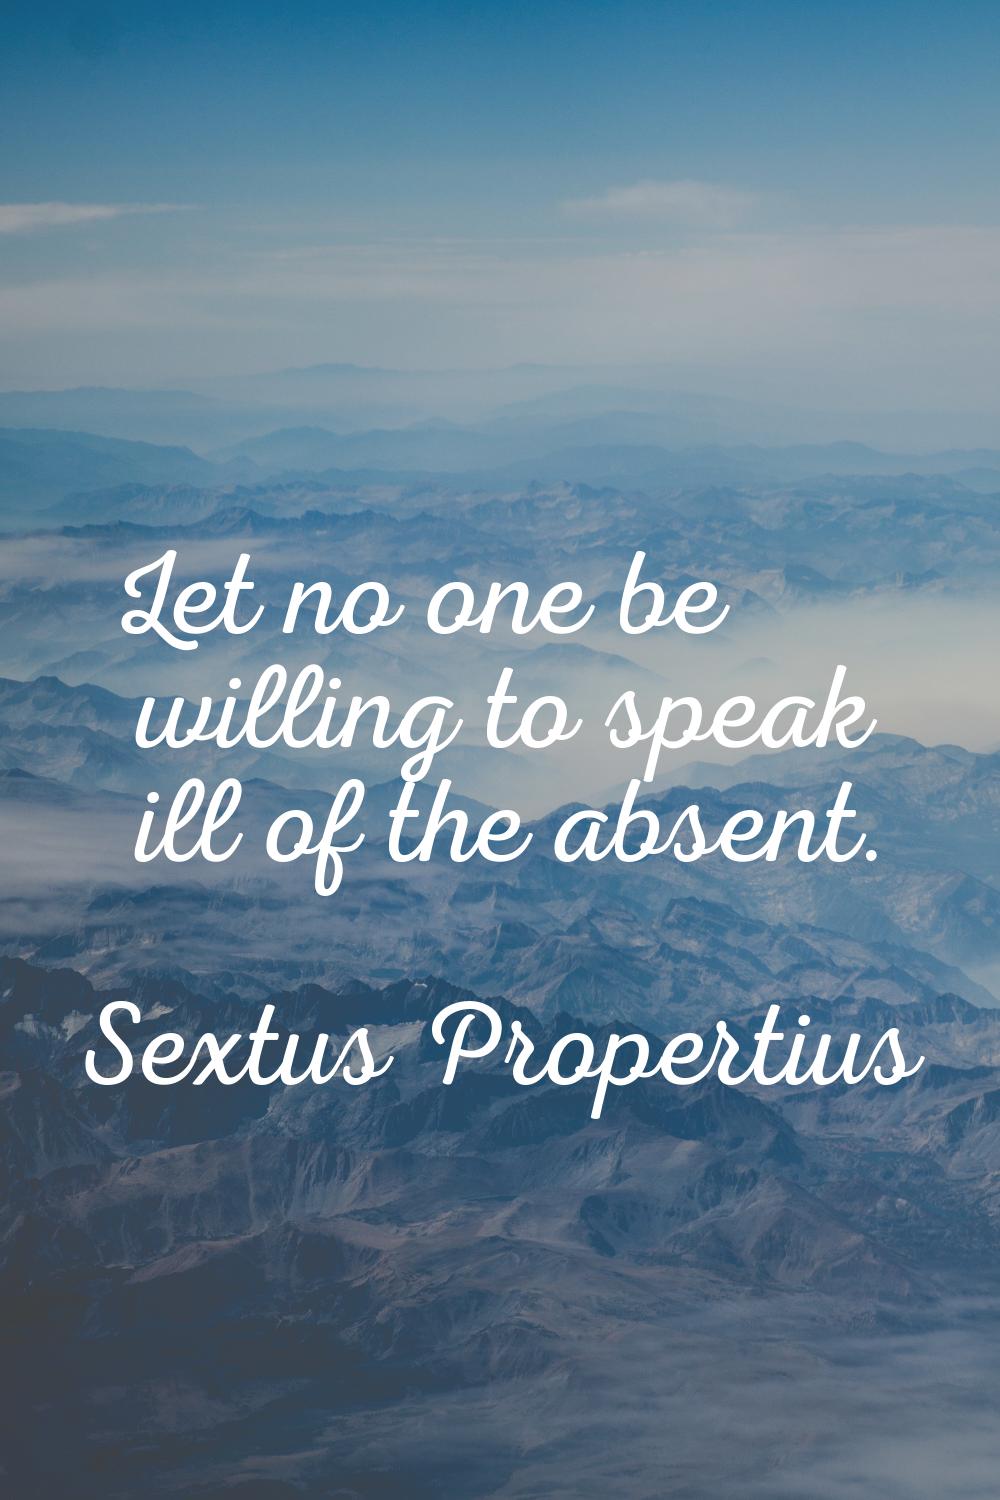 Let no one be willing to speak ill of the absent.